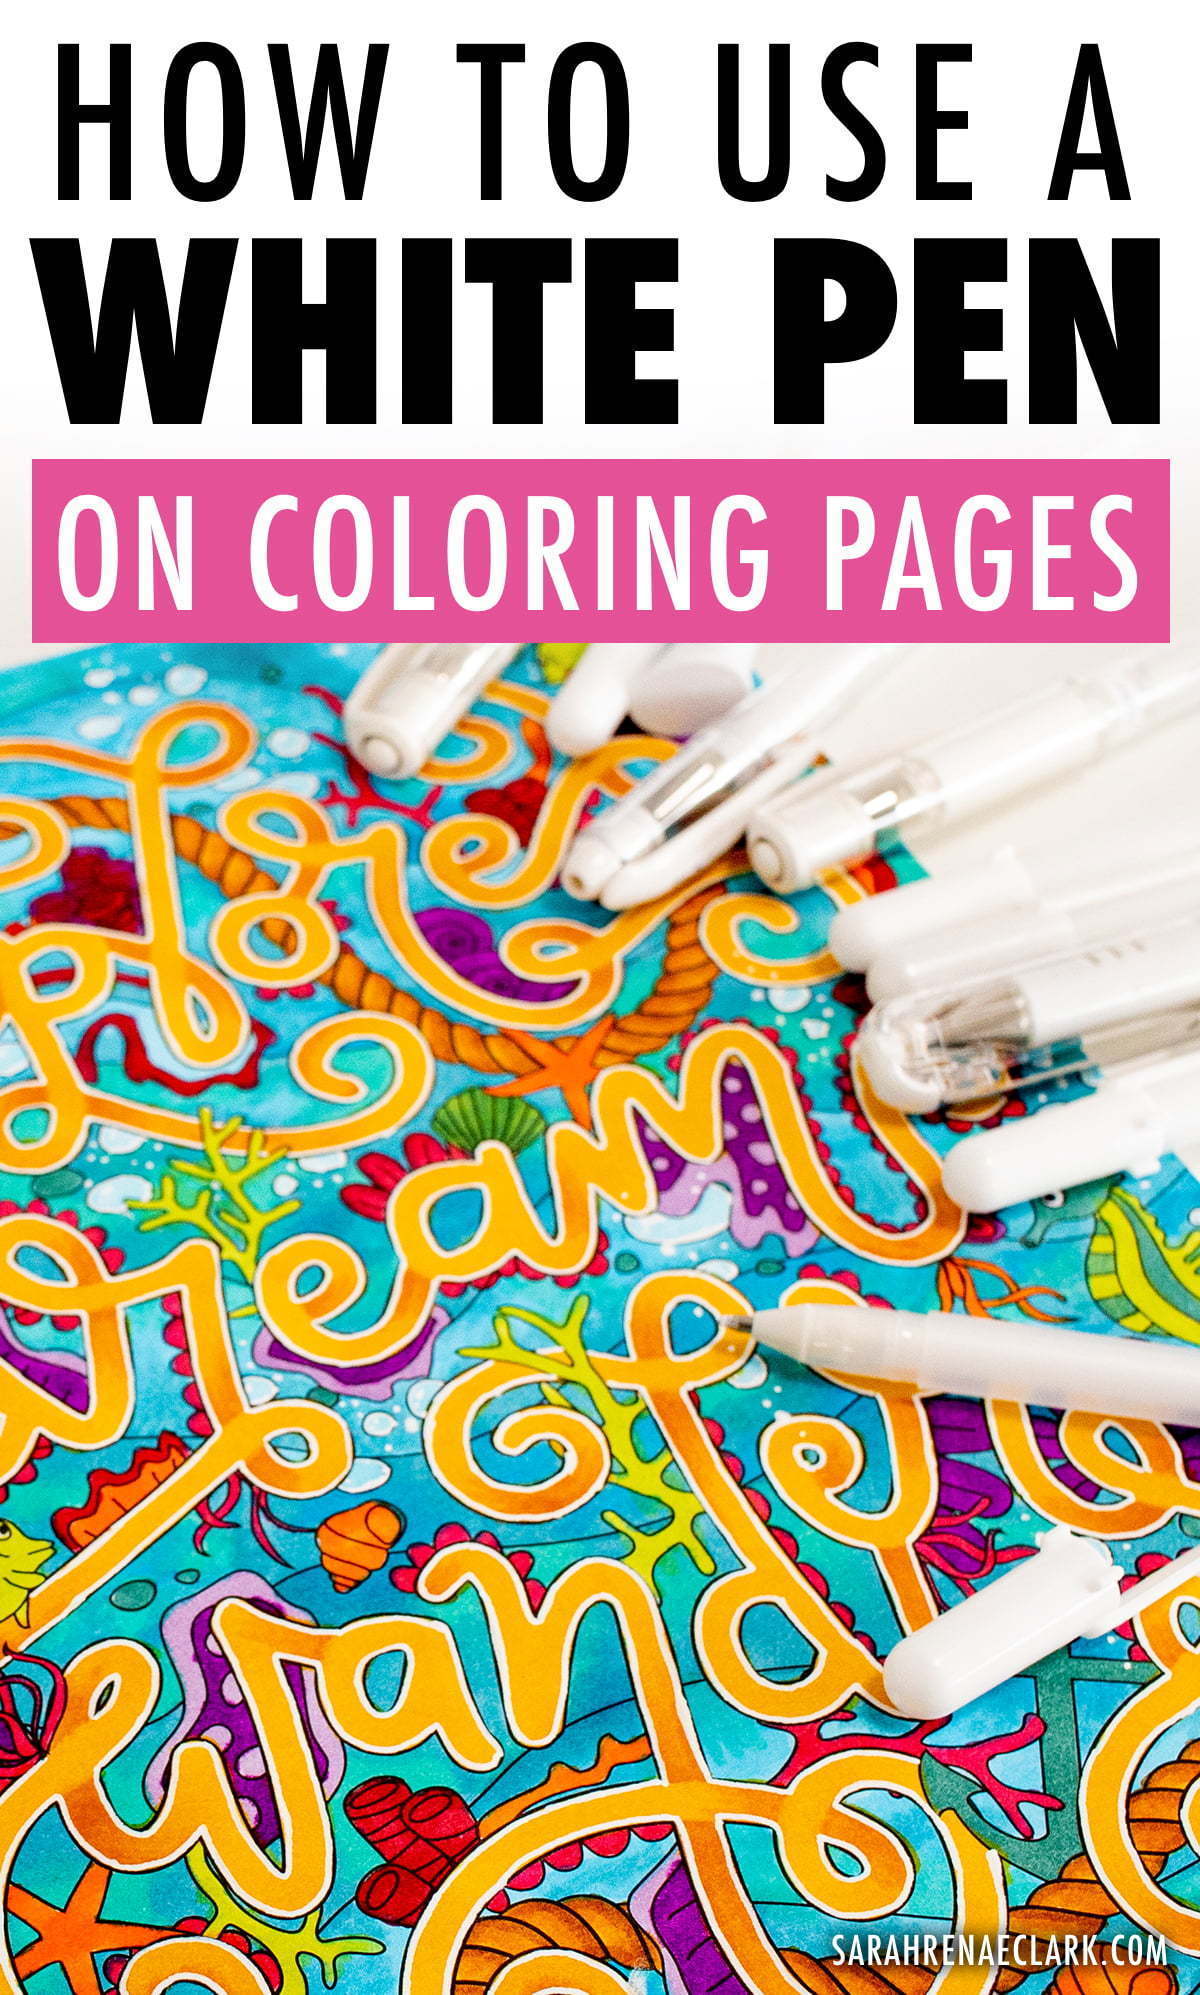 How to Use a White Pen on Coloring Pages